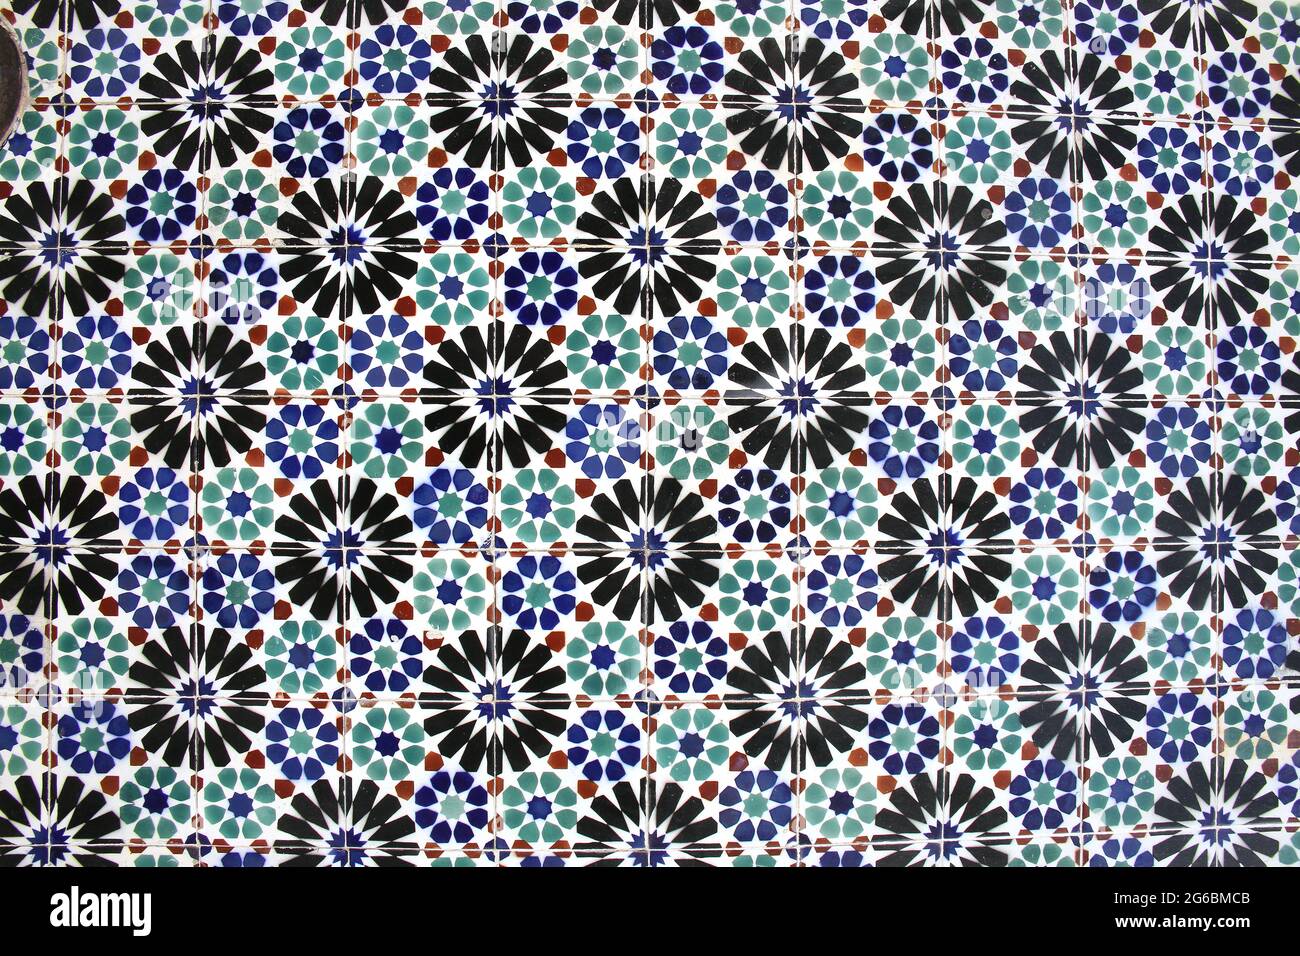 Glazed blue, black, green and red ceramic tiles or azulejos which cover many buildings in Lisbon, Portugal. Portuguese tiles with different designs. Stock Photo